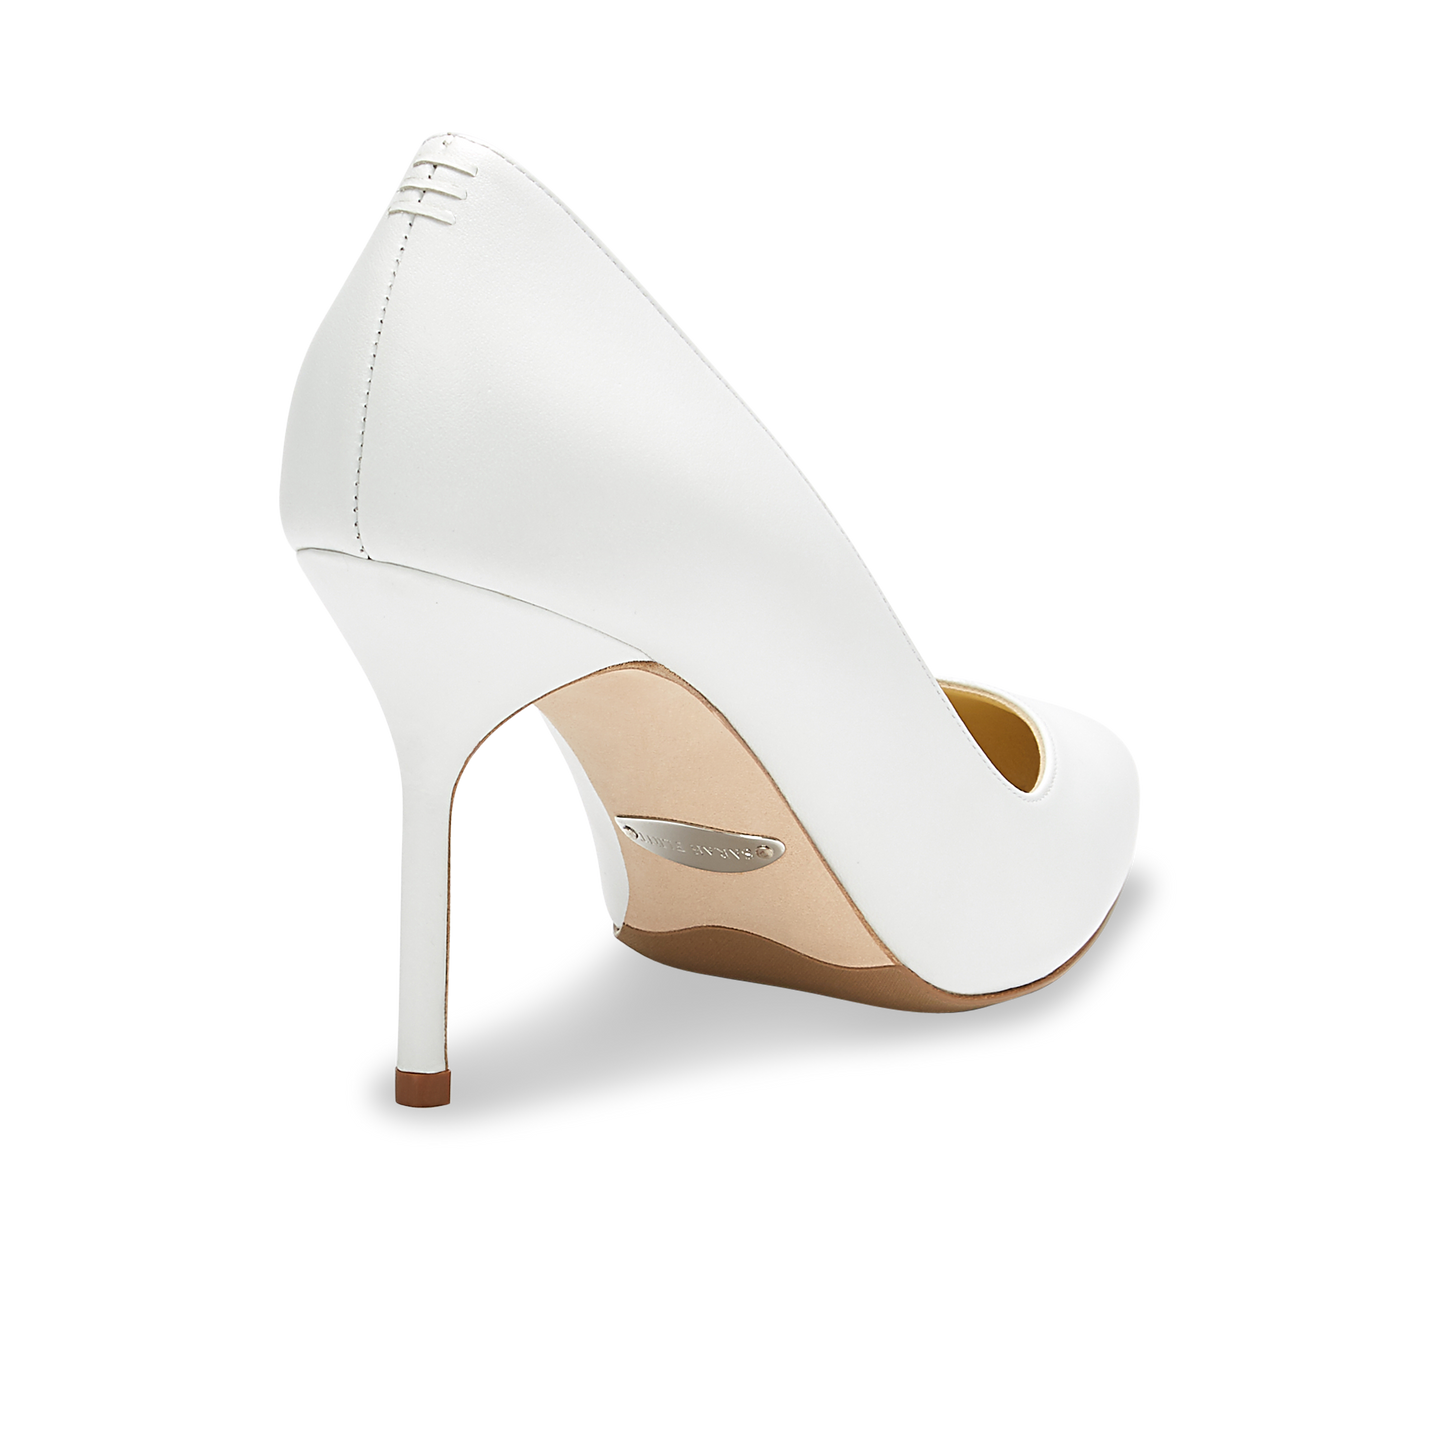 85mm Italian Made Pointed Toe Pump in White Calf